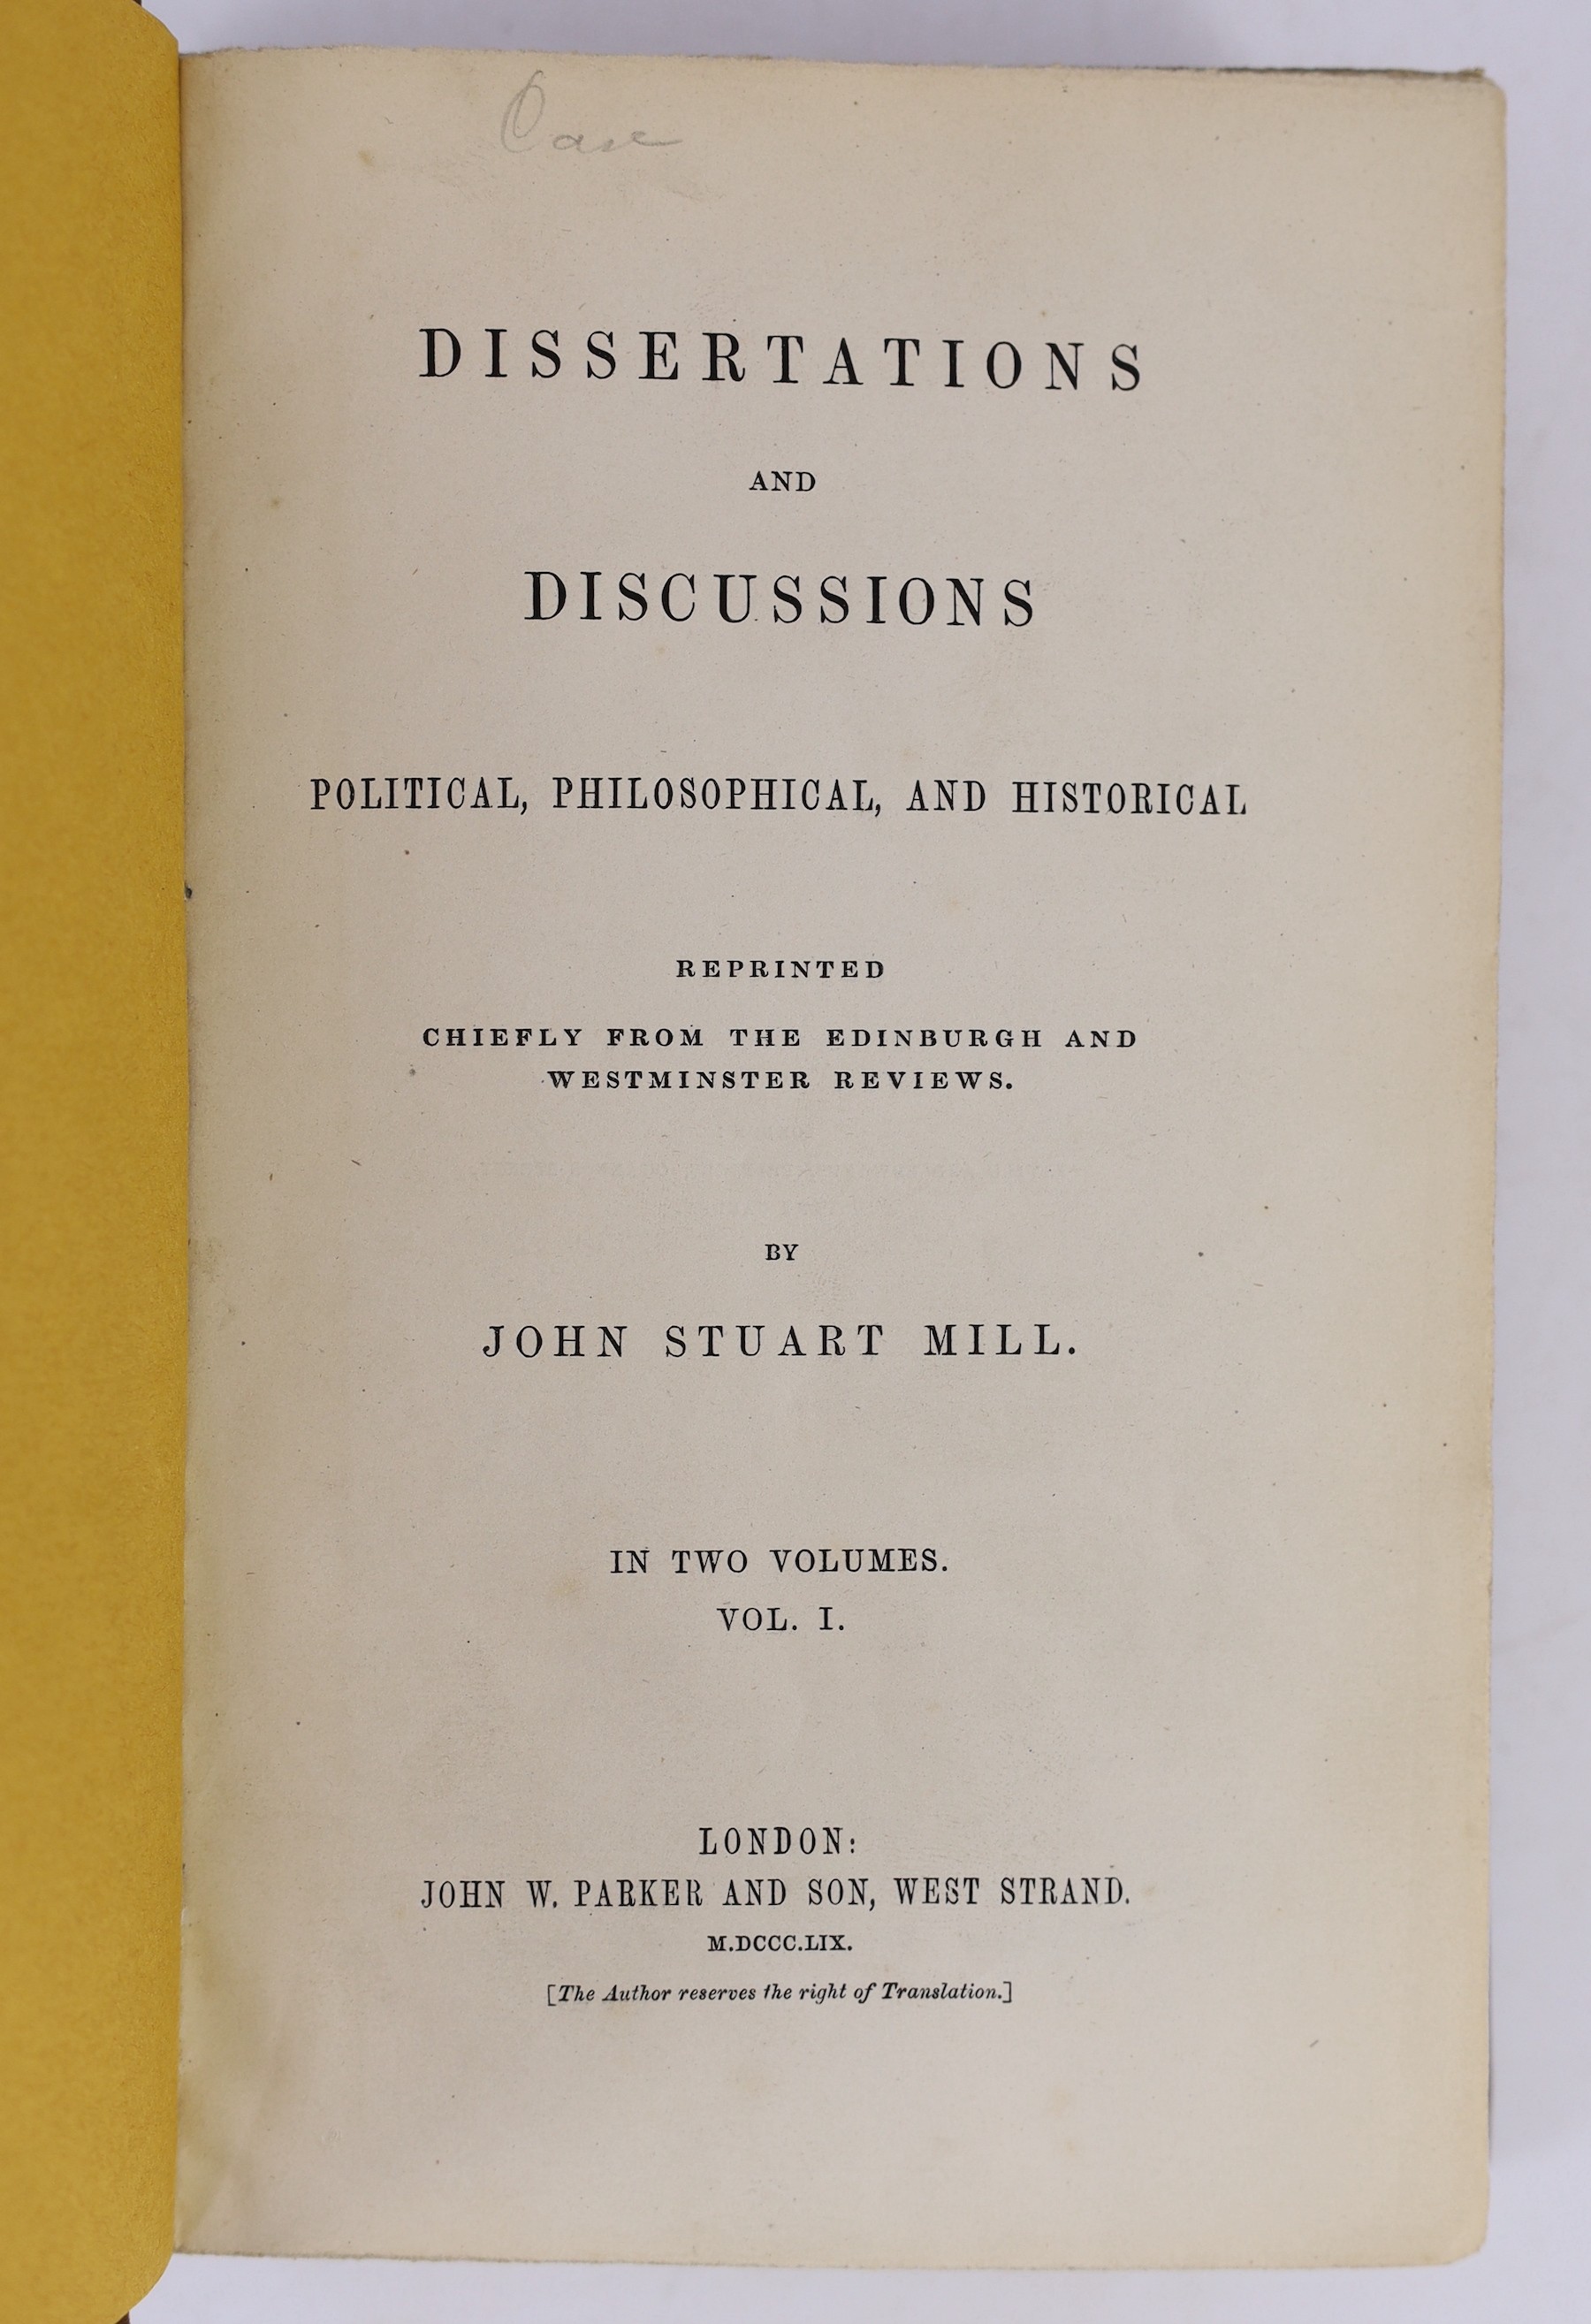 Mill, John Stuart - Dissertations and Discussions: political, philosophical, and historical... First Edition, 2 vols. original blind-decorated and gilt-lettered cloth. 1859